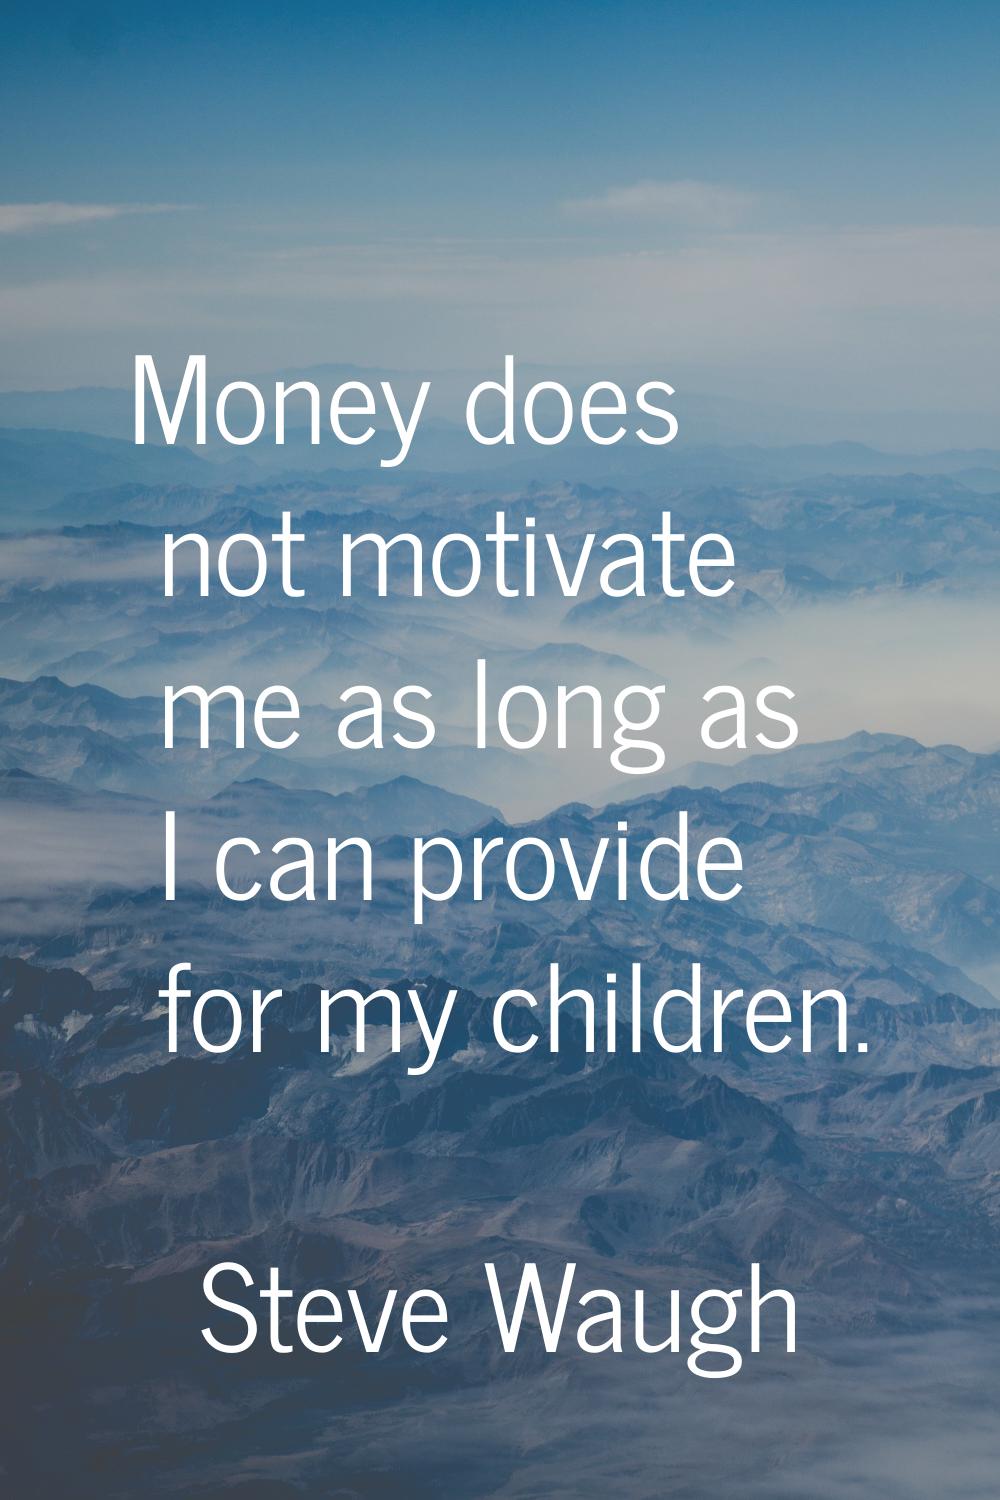 Money does not motivate me as long as I can provide for my children.